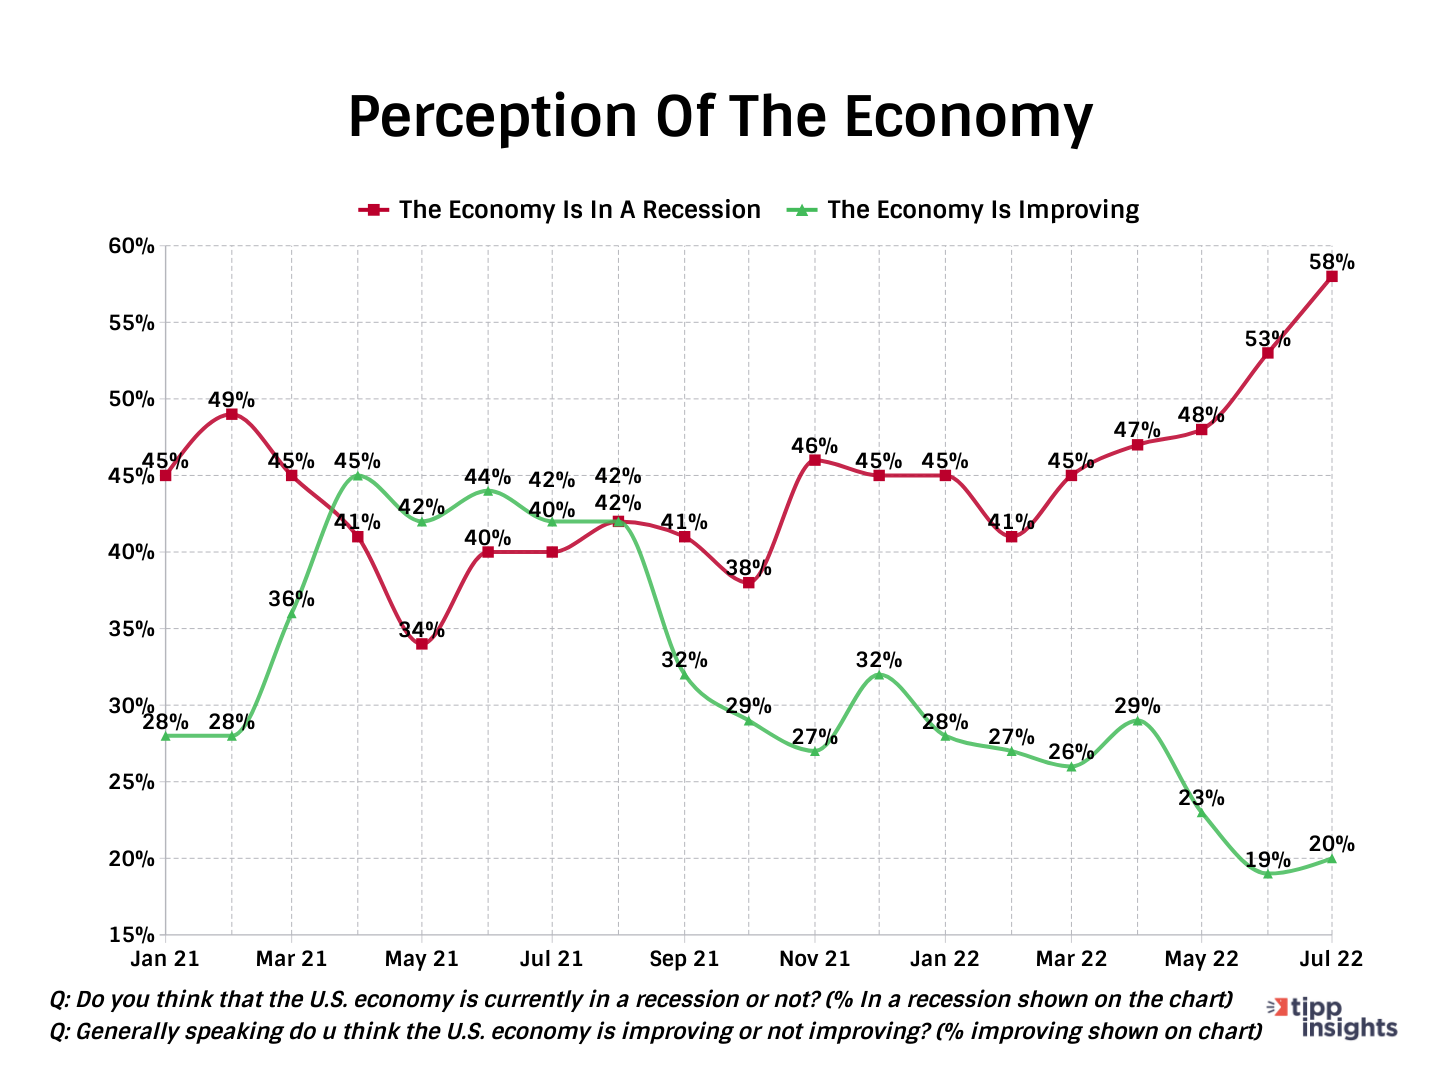 IBD/TIPP Poll Results: Comparison, Americans who believe Economy is in recession, and improving. 